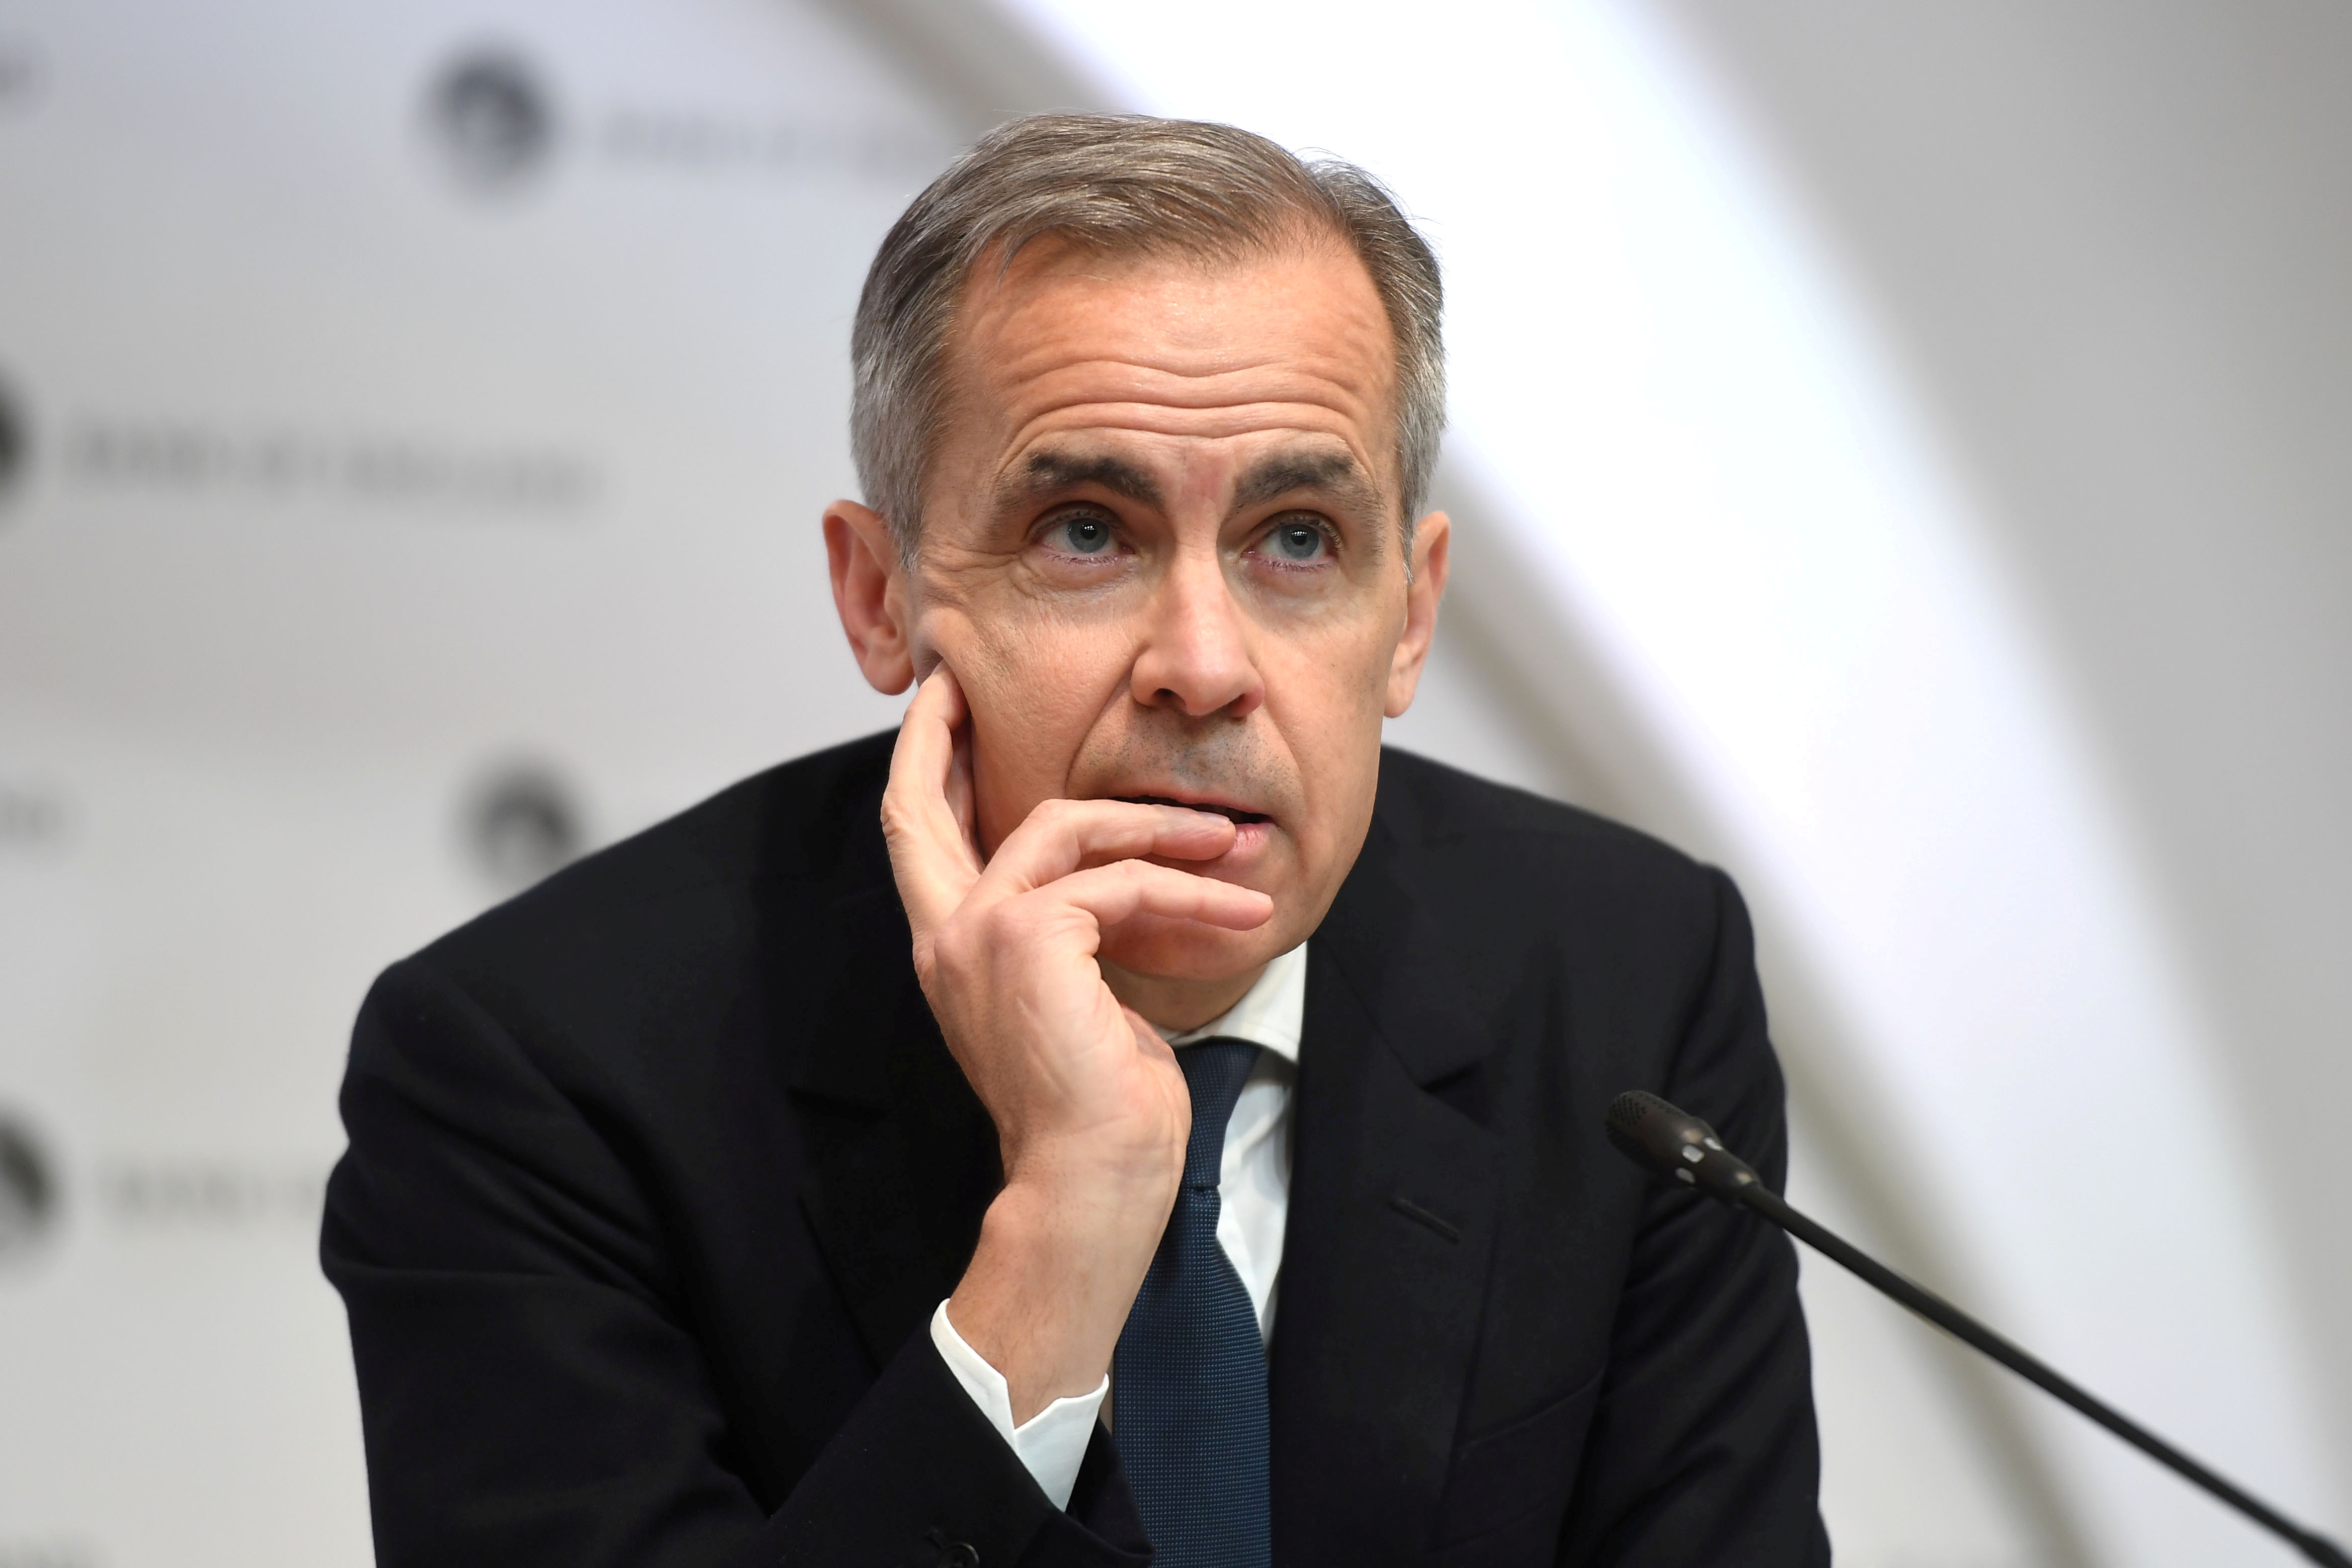 Bank of England (BOE) Governor Mark Carney attends a news conference in London